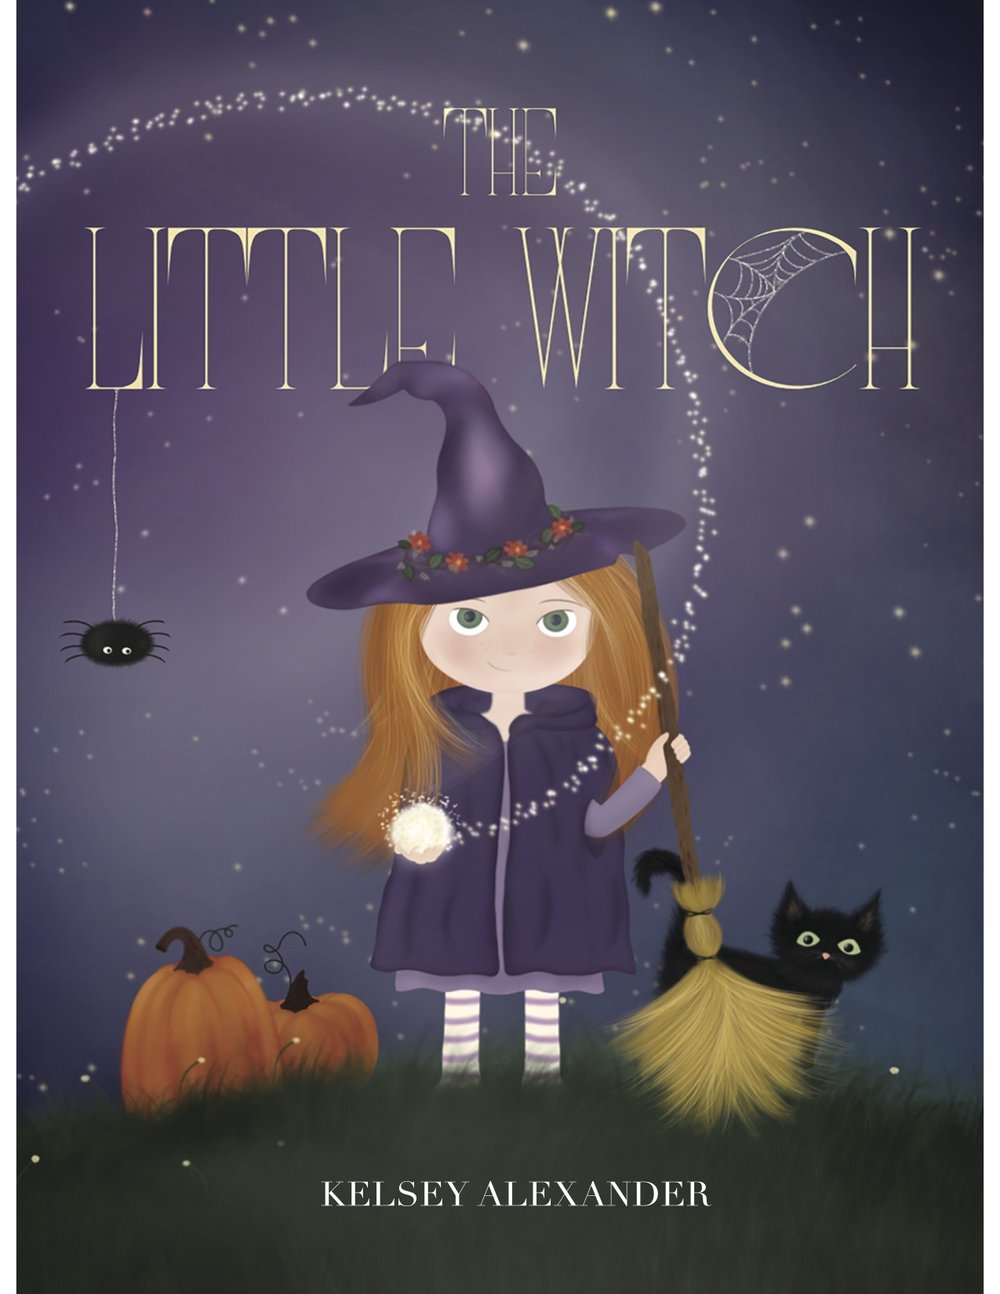 The little witch book by Kelsey Alexander